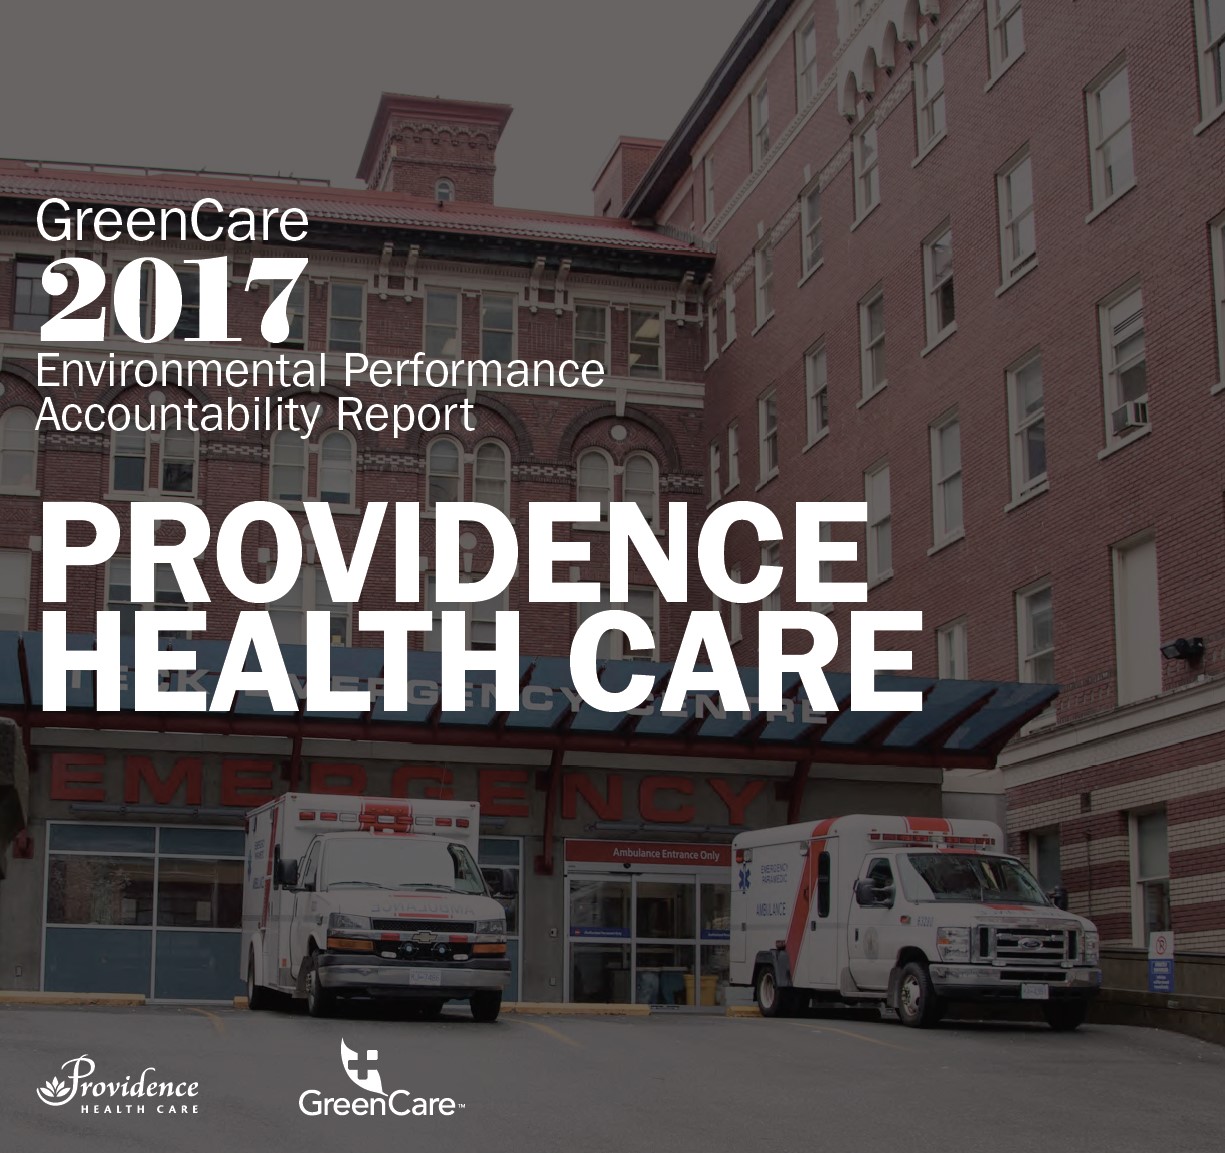 2017 Environmental Performance Accountability Report for Providence Health Care